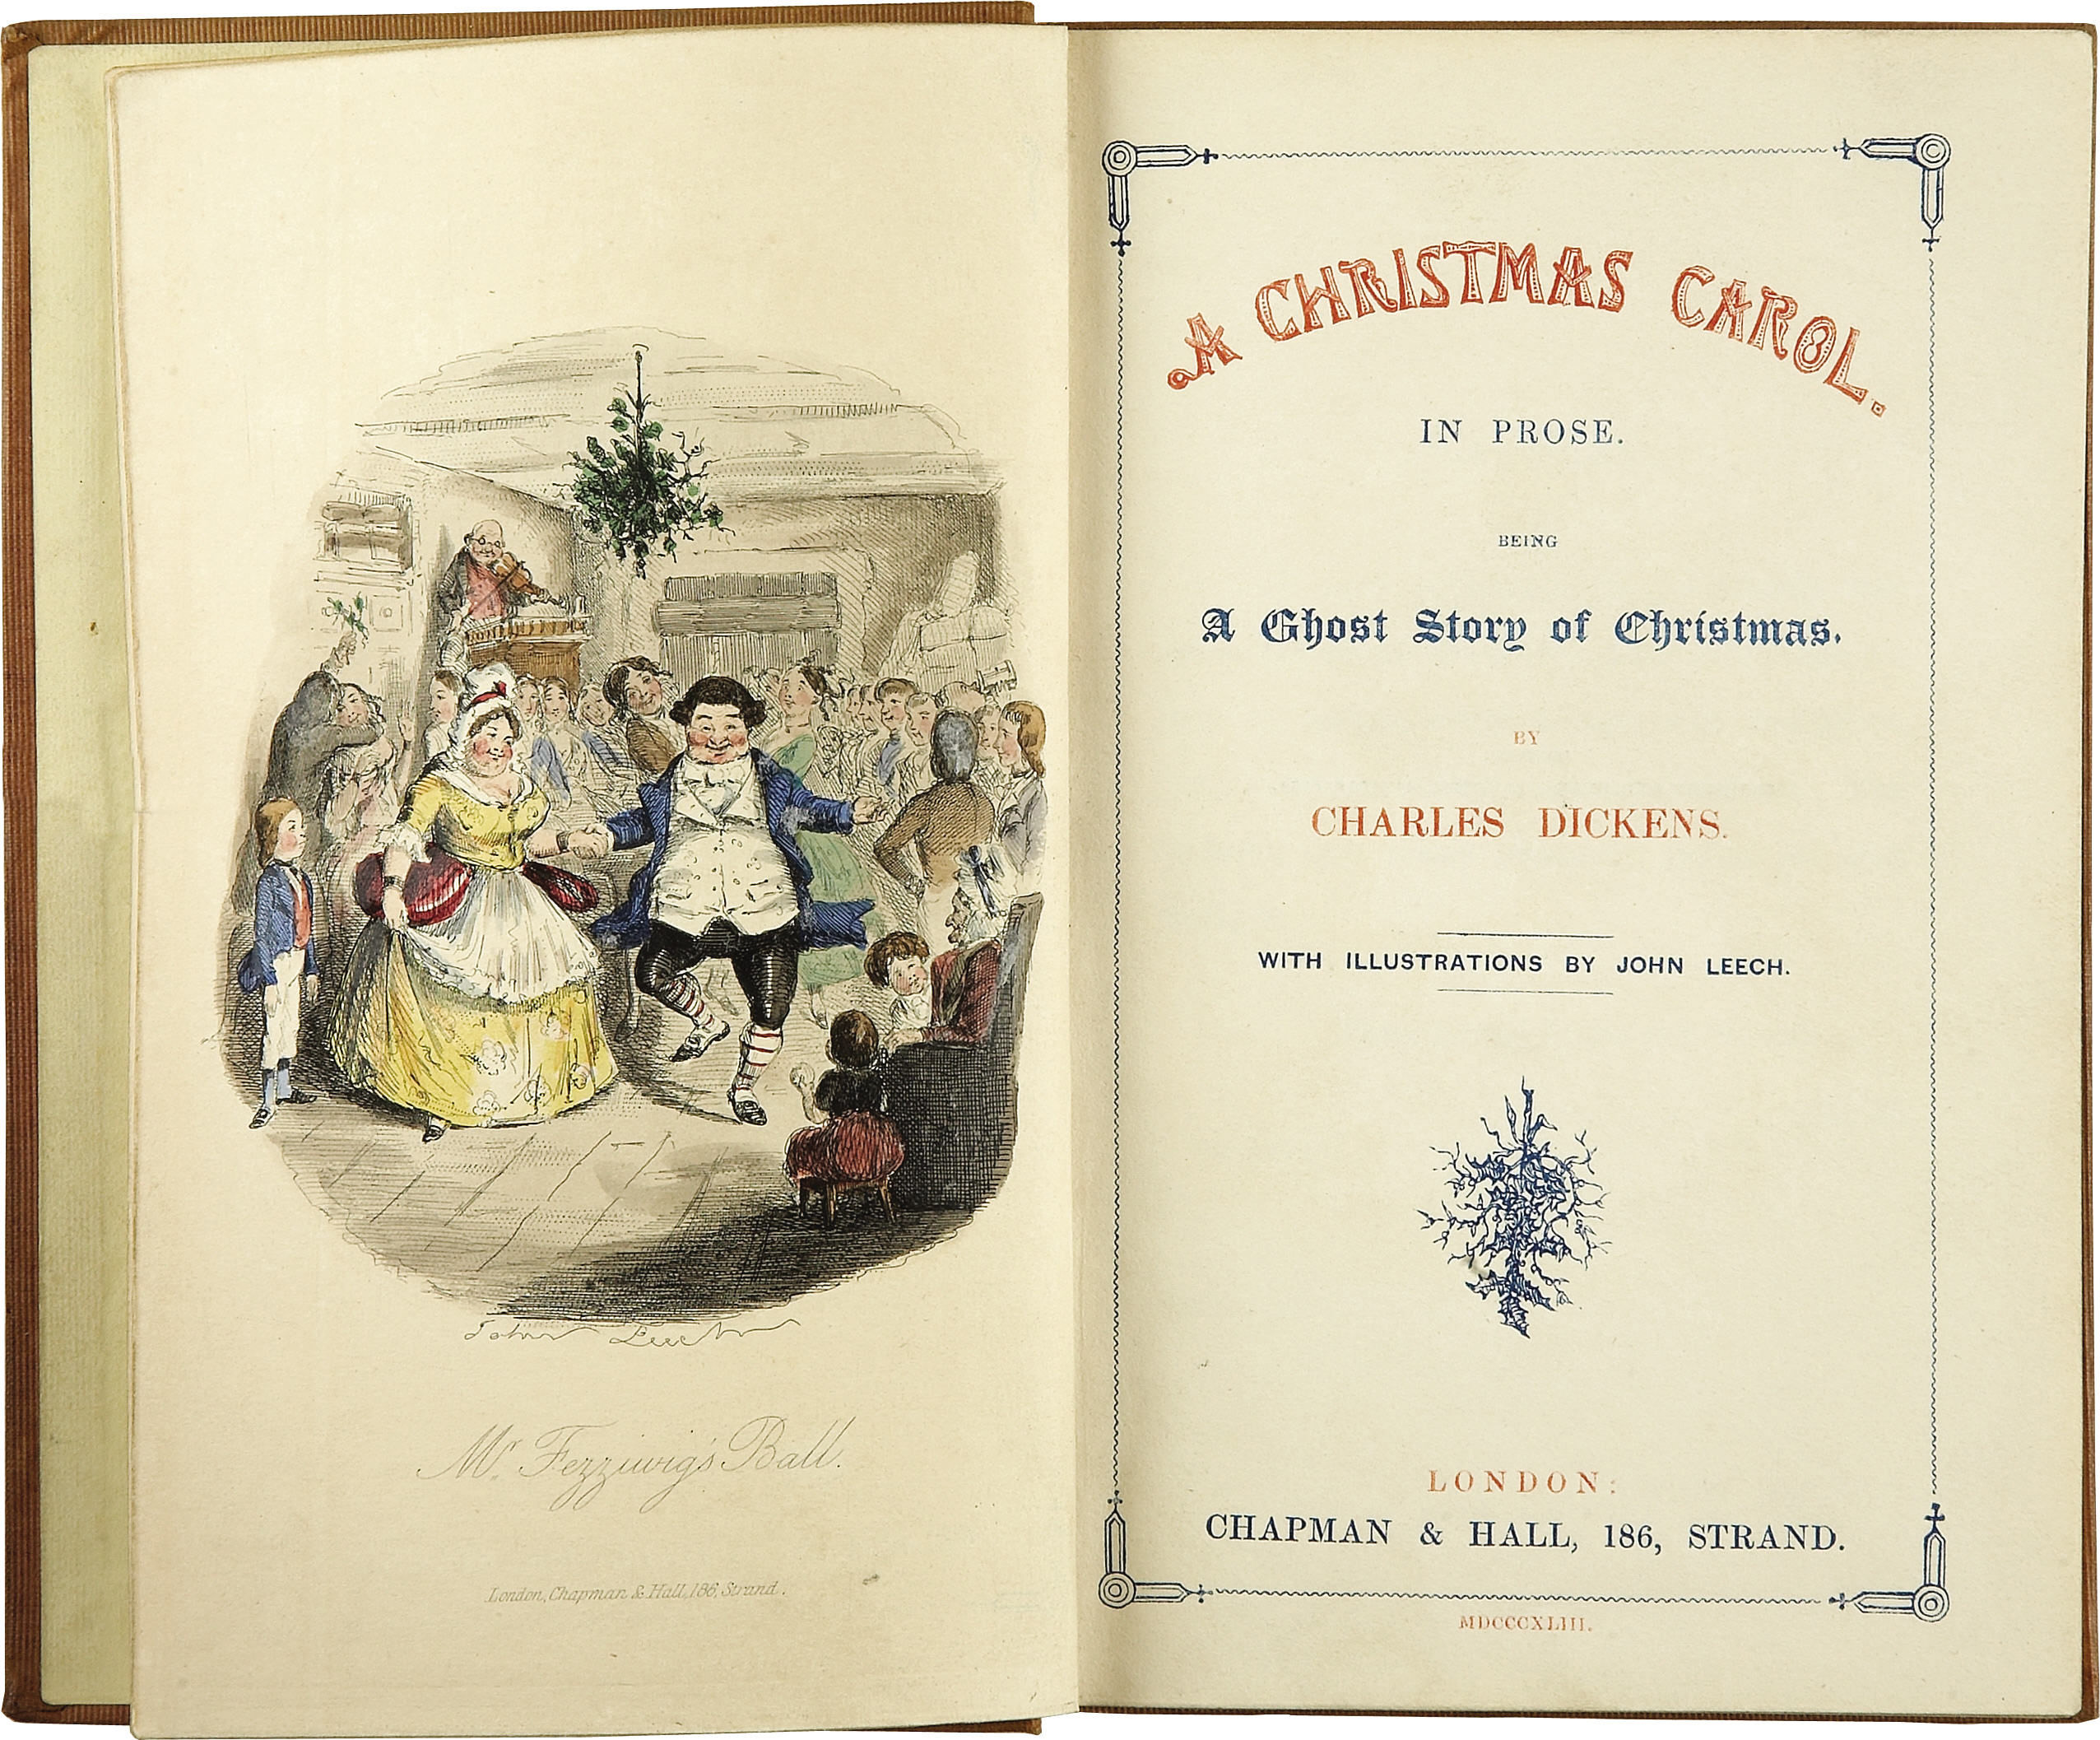 Title page from the 1843 Charles Dickens holiday classic, "A Christmas Carol"